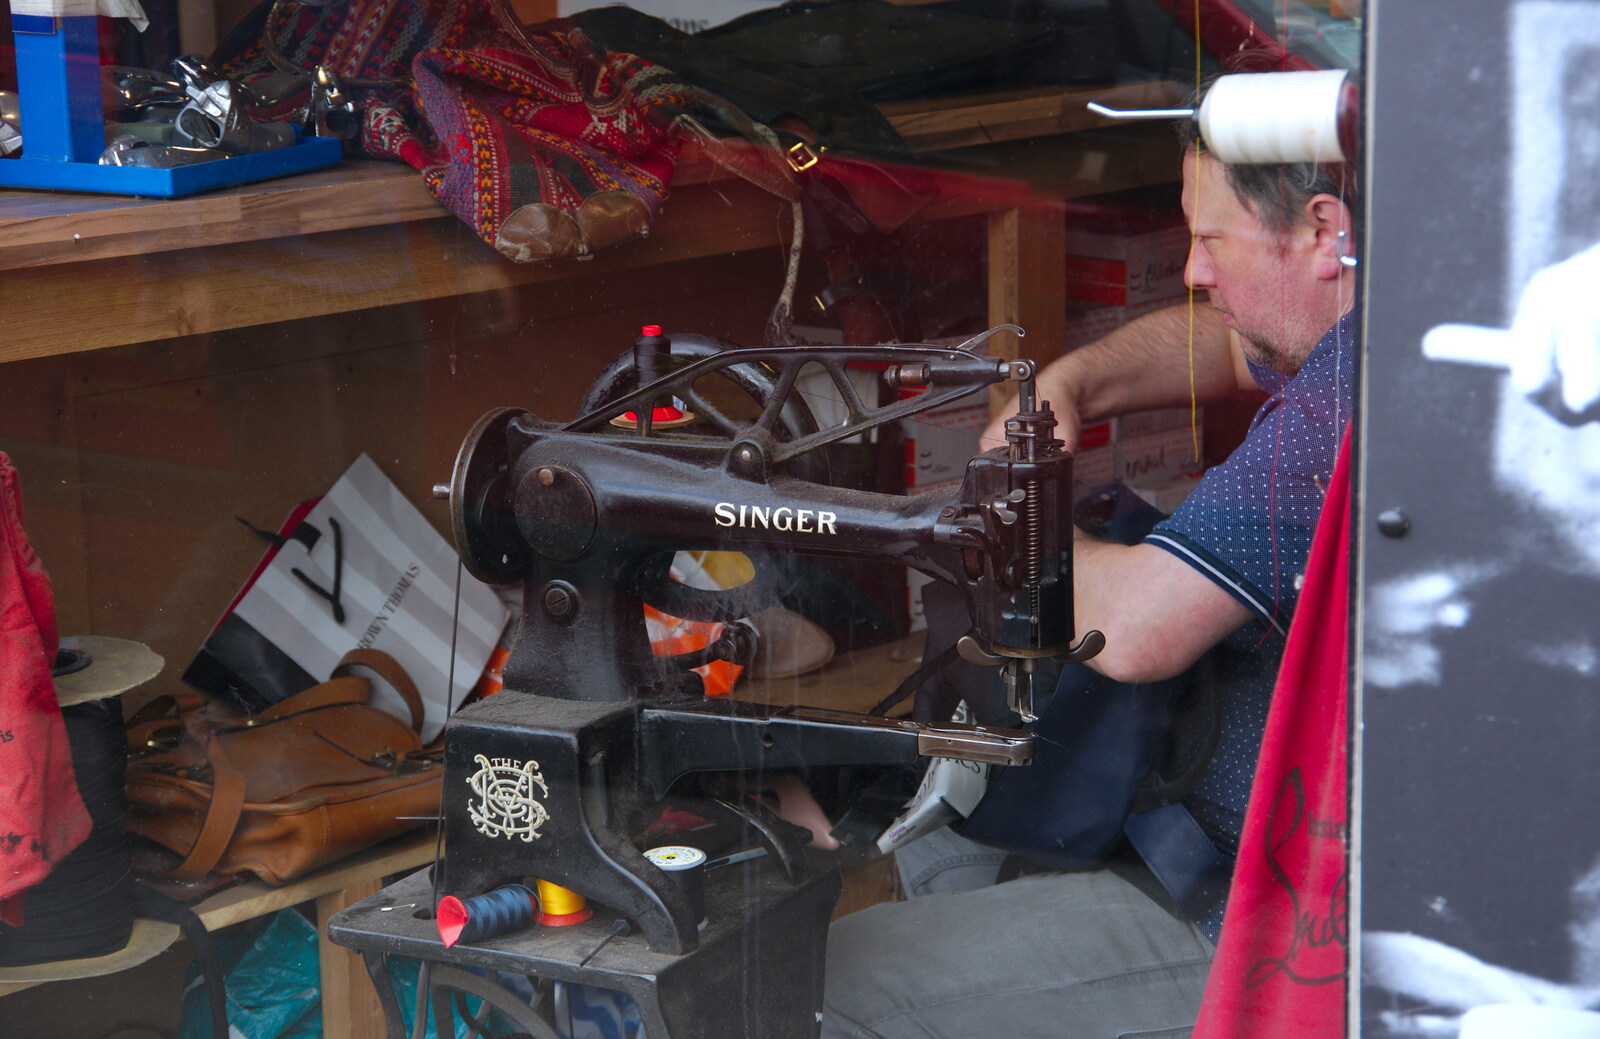 A repair shop with a Singer sewing machine from Busking in Temple Bar, Dublin, Ireland - 12th August 2019